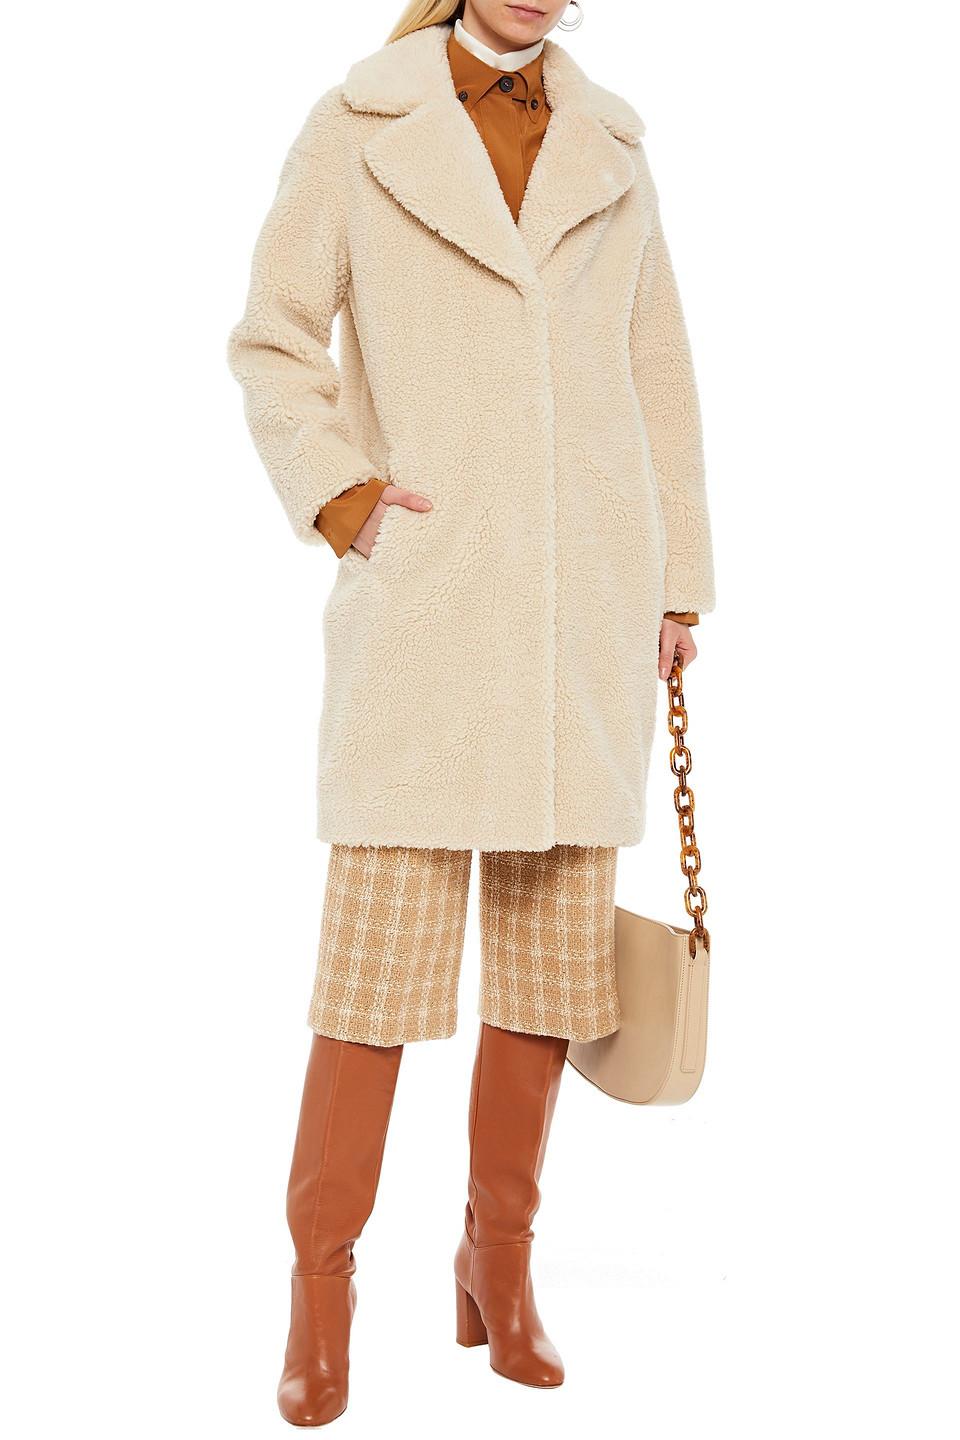 Stand Studio Camille Cocoon Faux Shearling Coat in Natural | Lyst